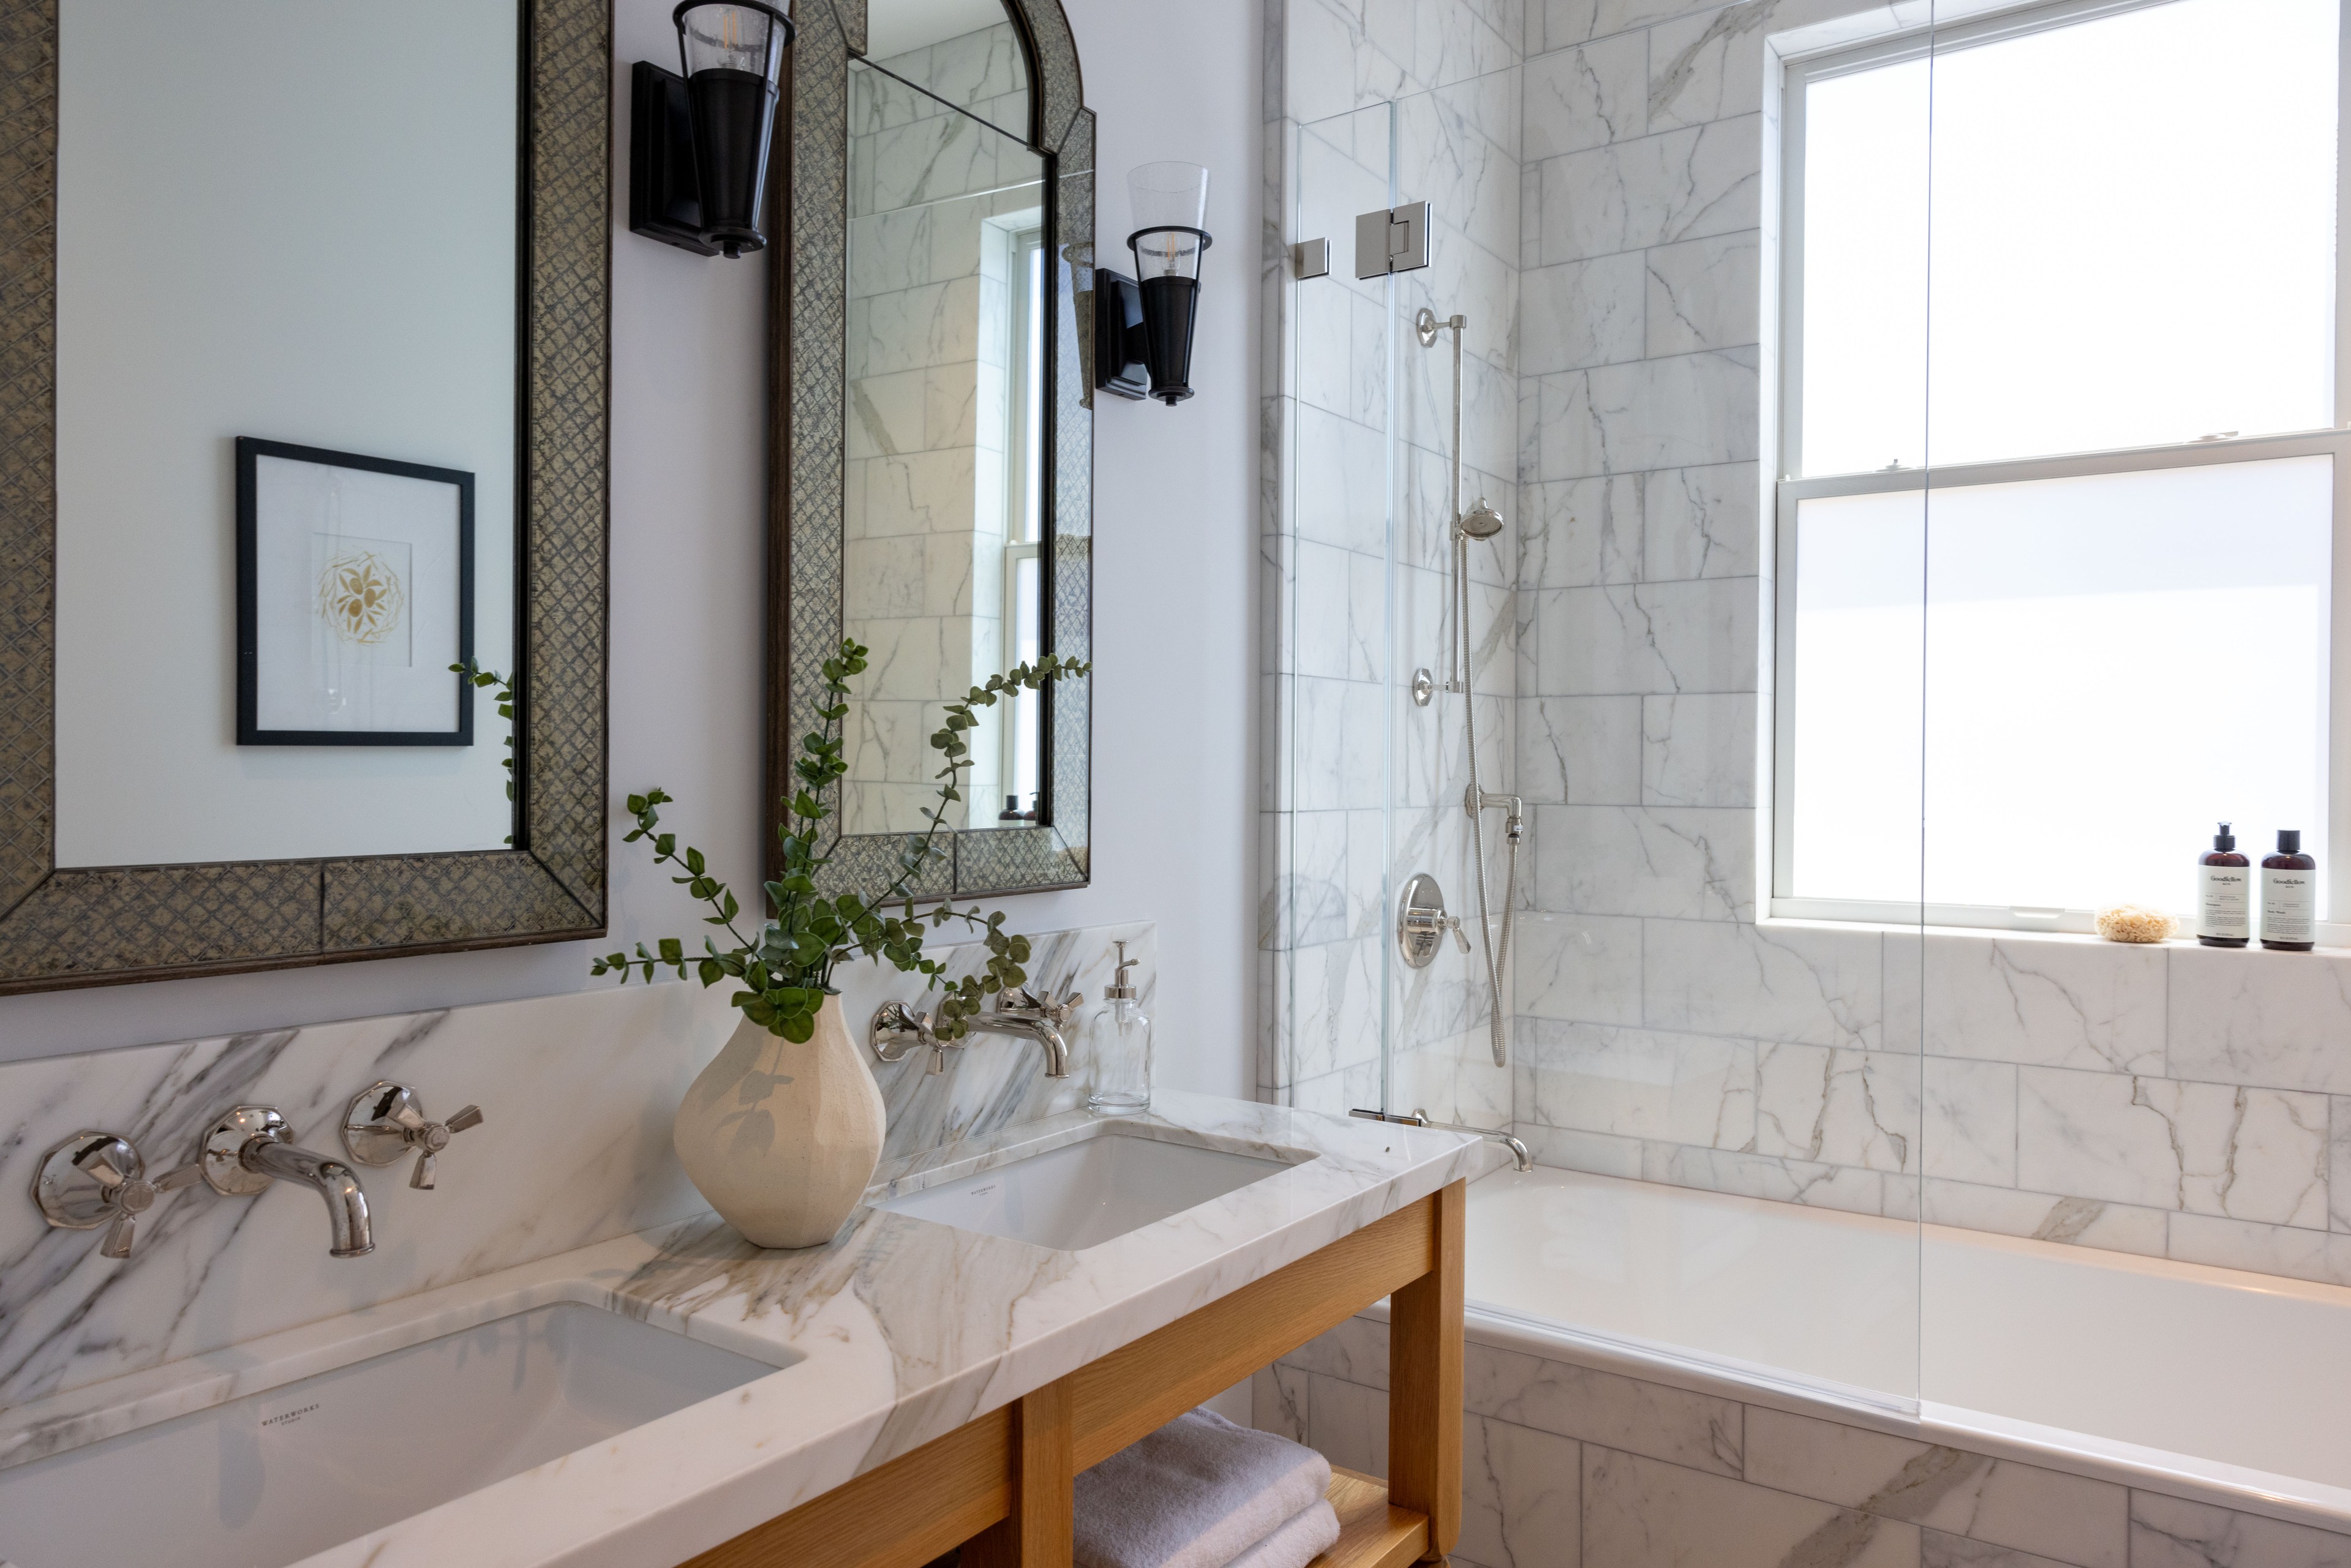 The image shows a stylish bathroom with white marble countertops and walls, dual sinks, decorative mirrors above, a white vase with green leaves, and a bathtub with a shower.